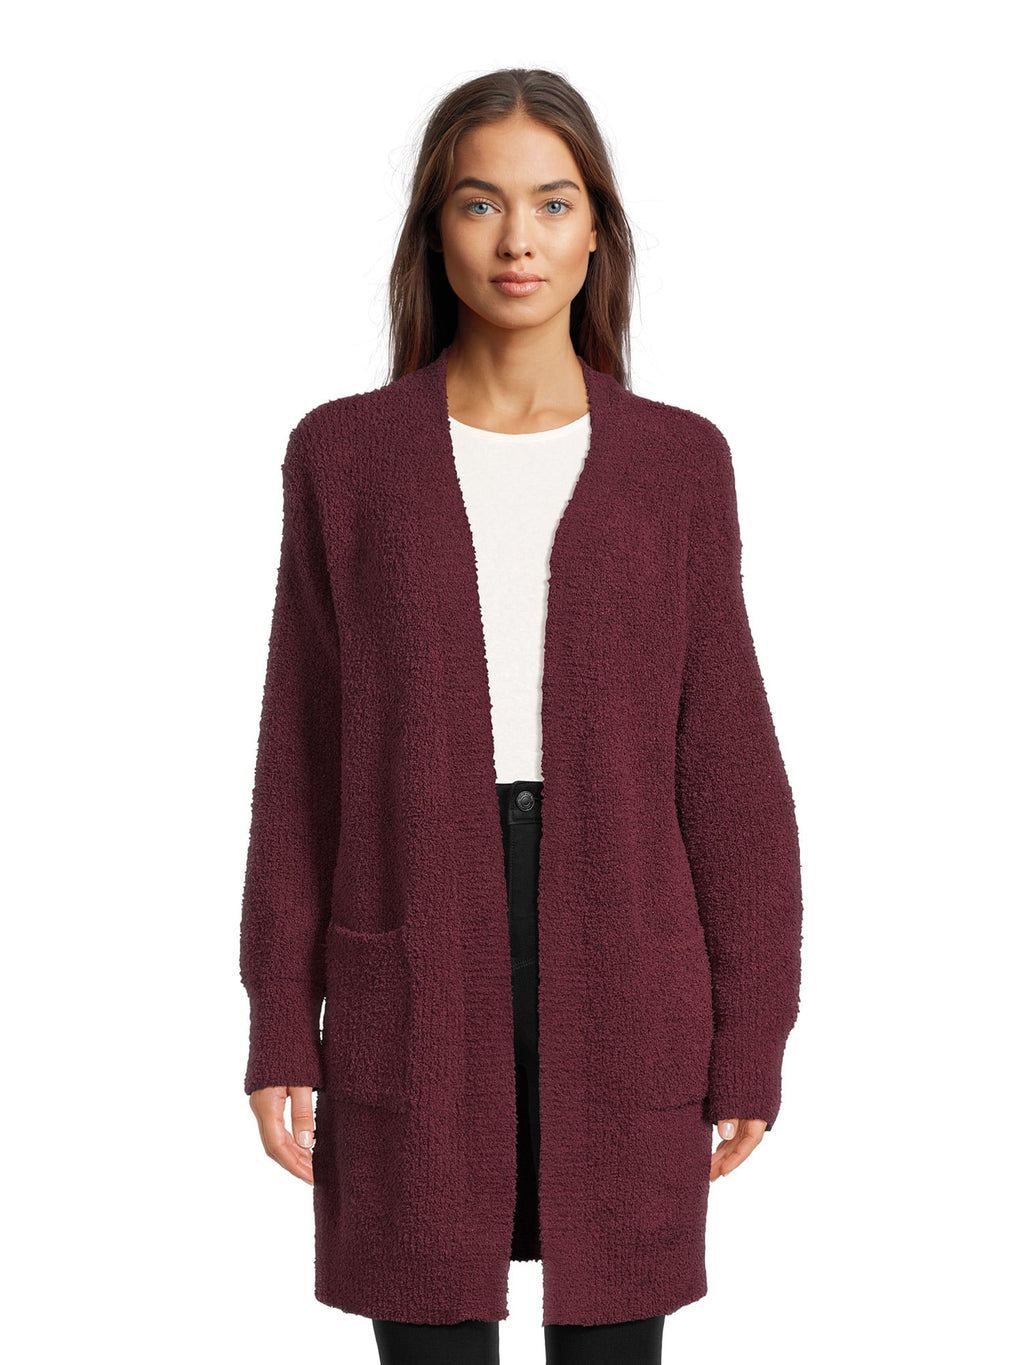 Time and Tru Women's Duster Cardigan Sweater, Midweight, Sizes XS-XXXL - image 1 of 5